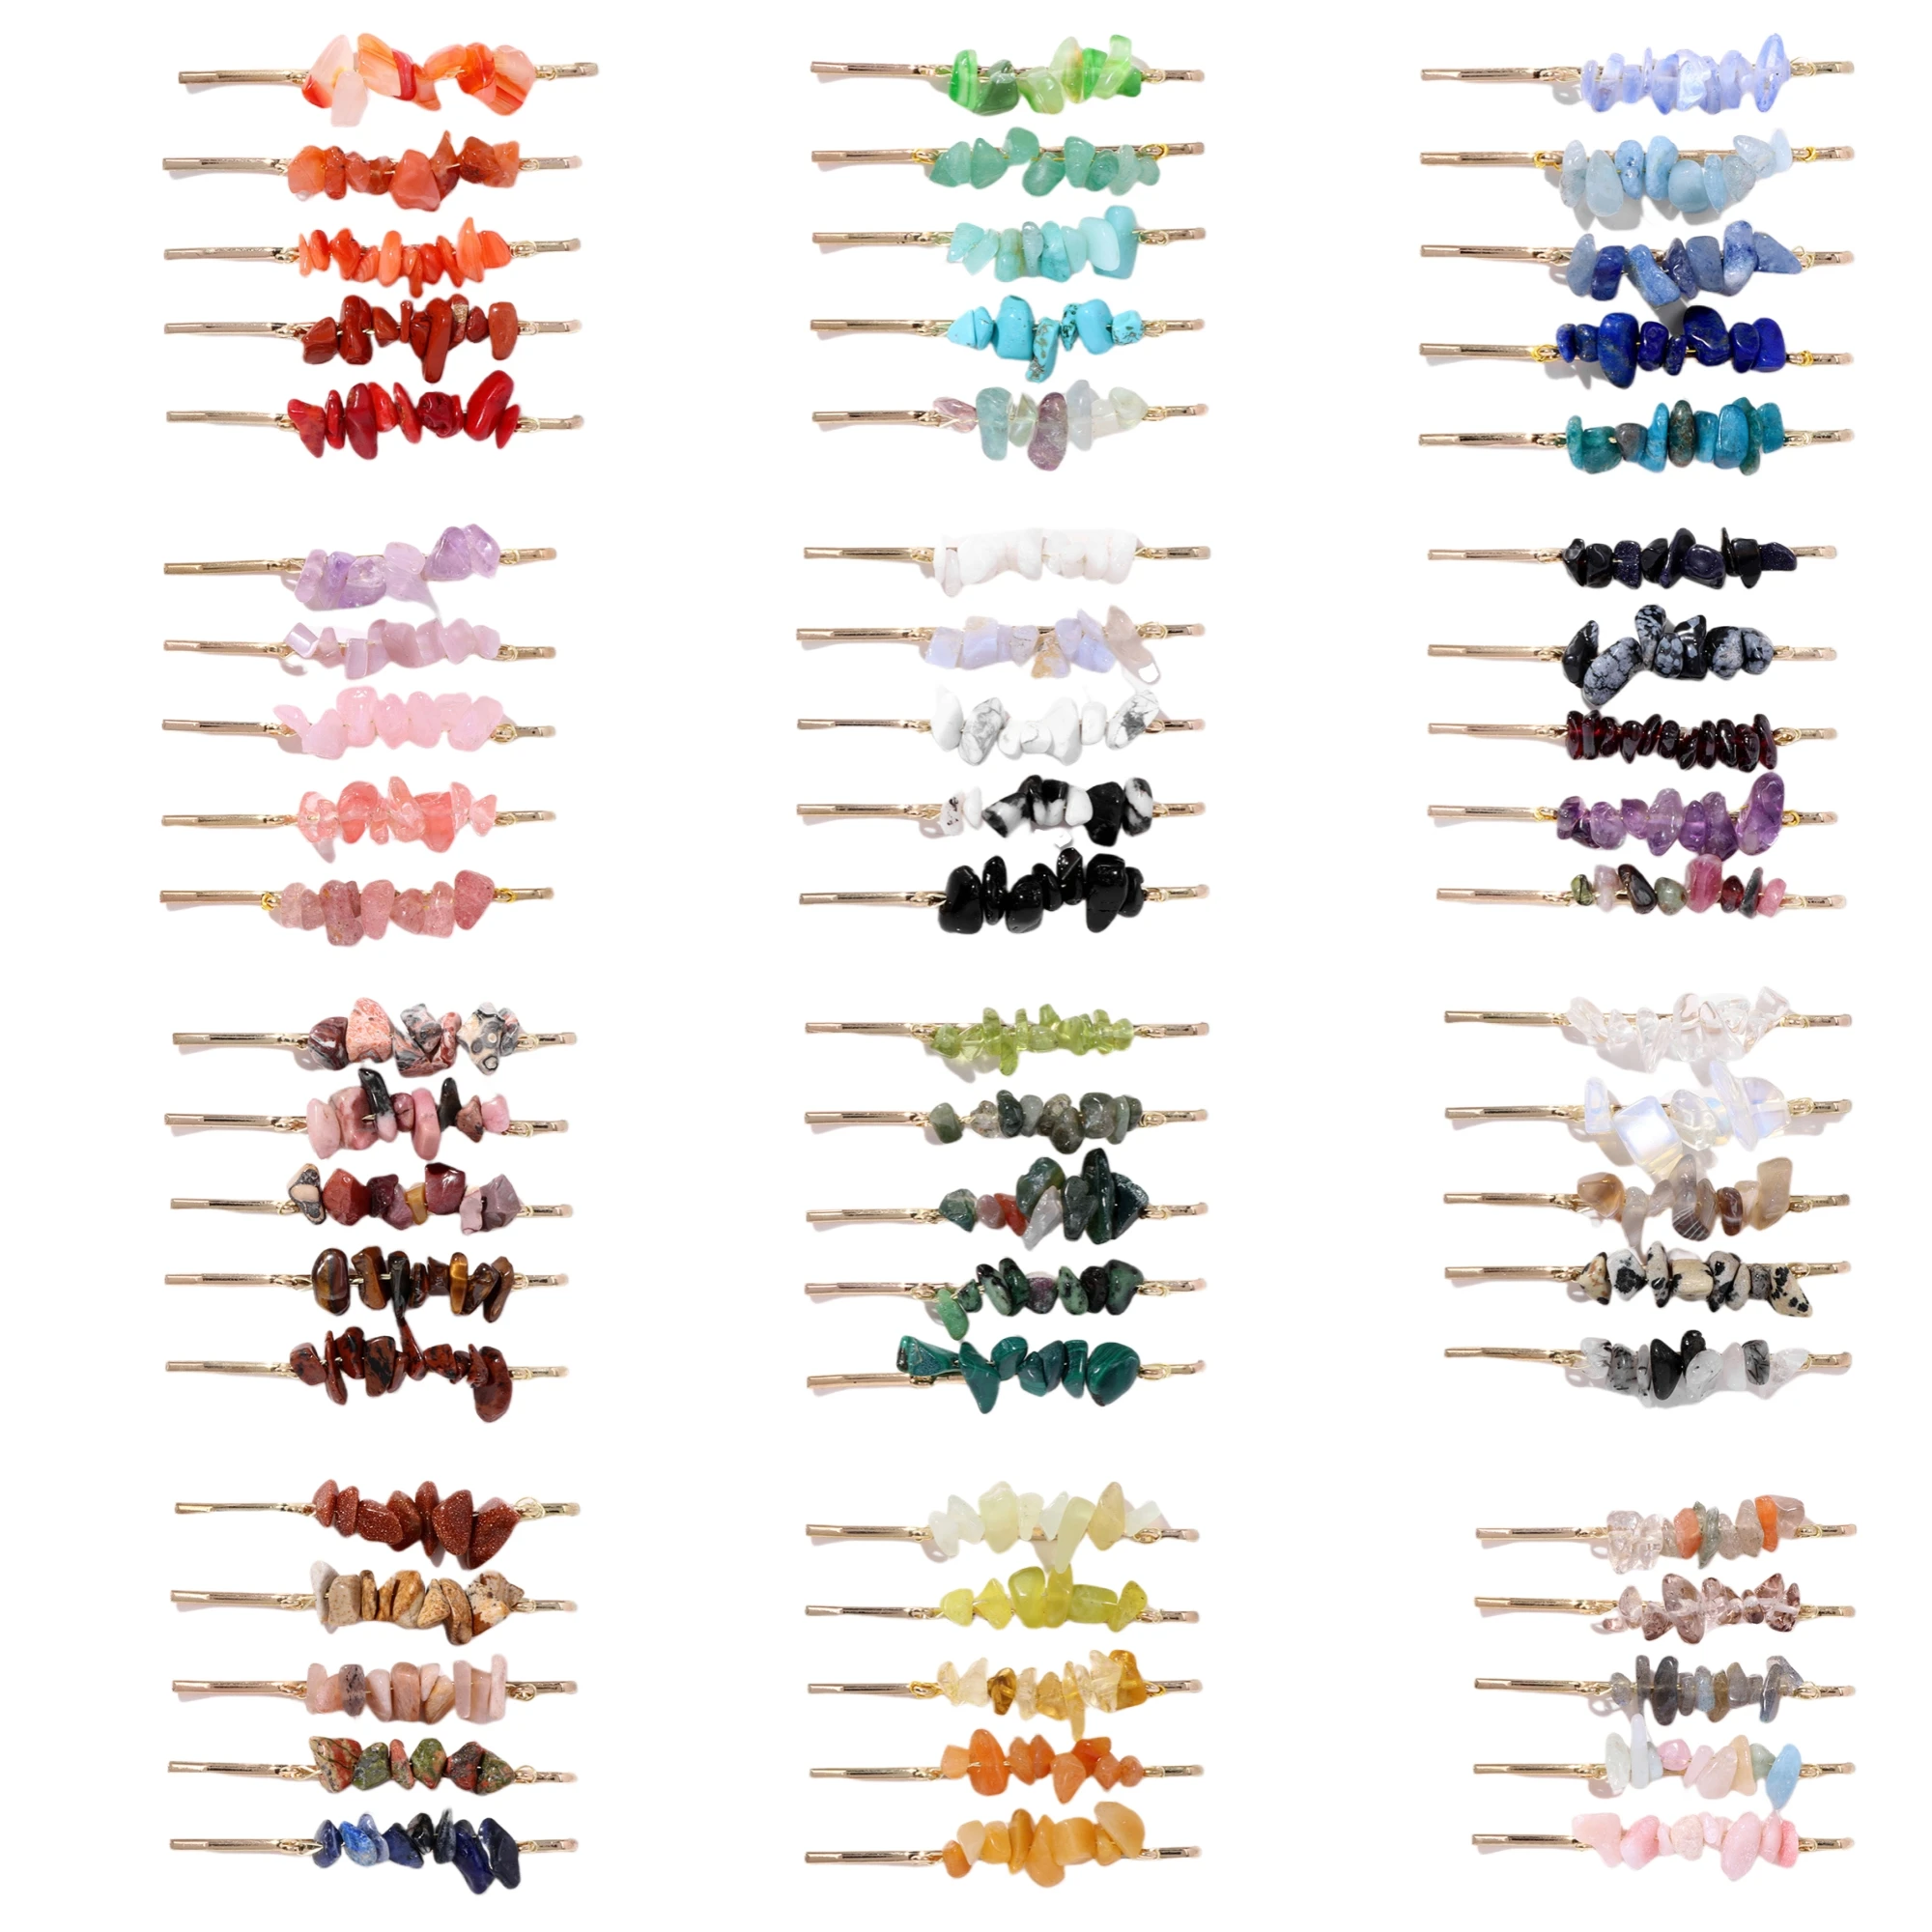 Women Gemstone Hair Clip 5PCS Natural Stone Crystal Irregular Chips Hairpins Gold Color Headwear Barrettes Girl friend Party coated crystal cluster stone craft star heart shaped photo holder stands table holders card paper menu clip party decor ornament